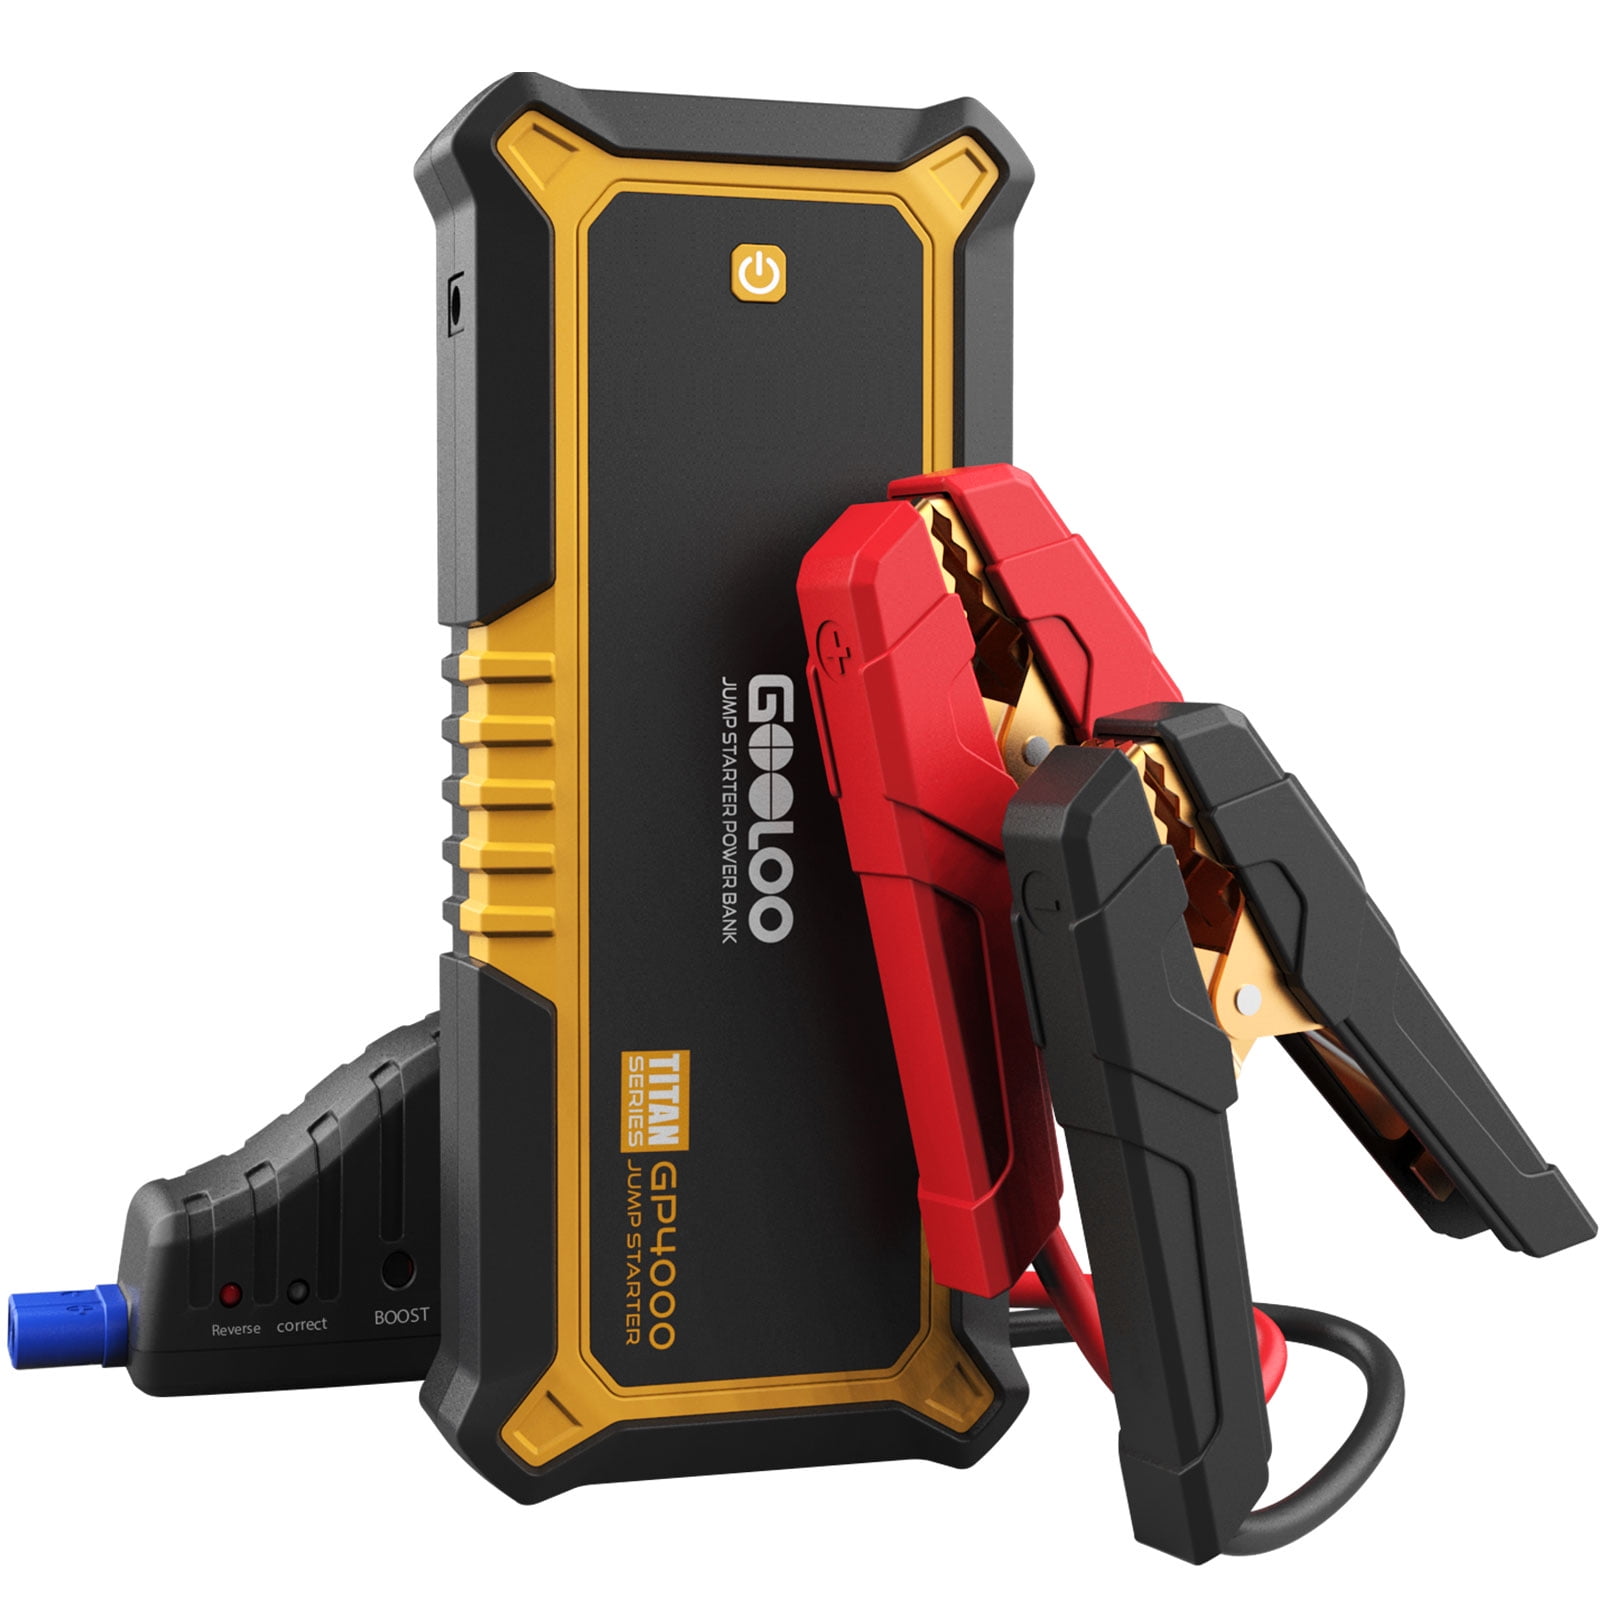 Power Pack Lithium Ion Portable Compact Back Up Fuel Battery Pack Jump Starter 